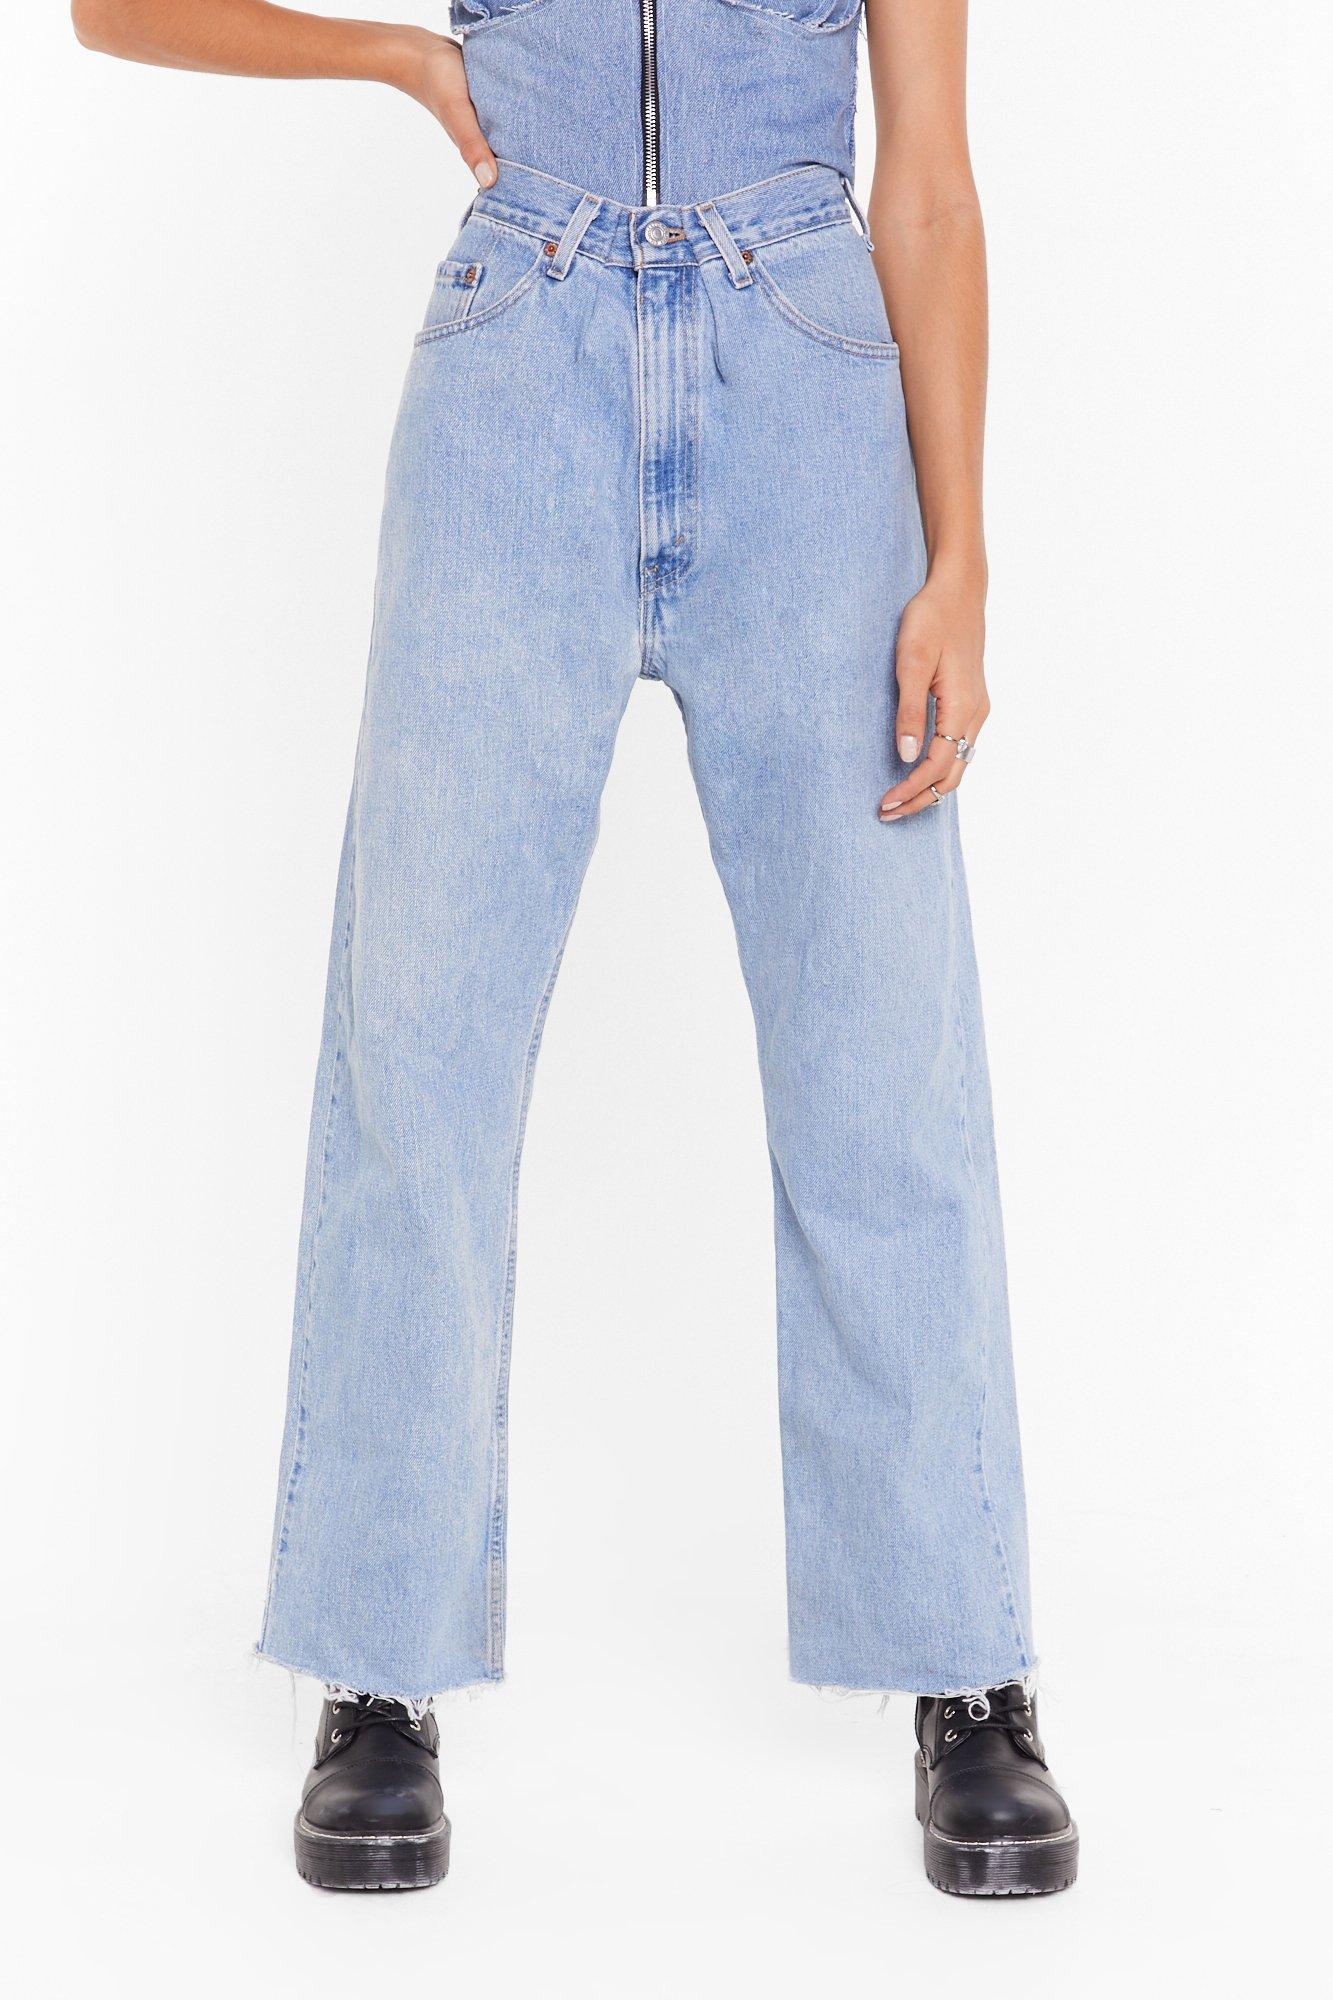 high waisted washed out jeans